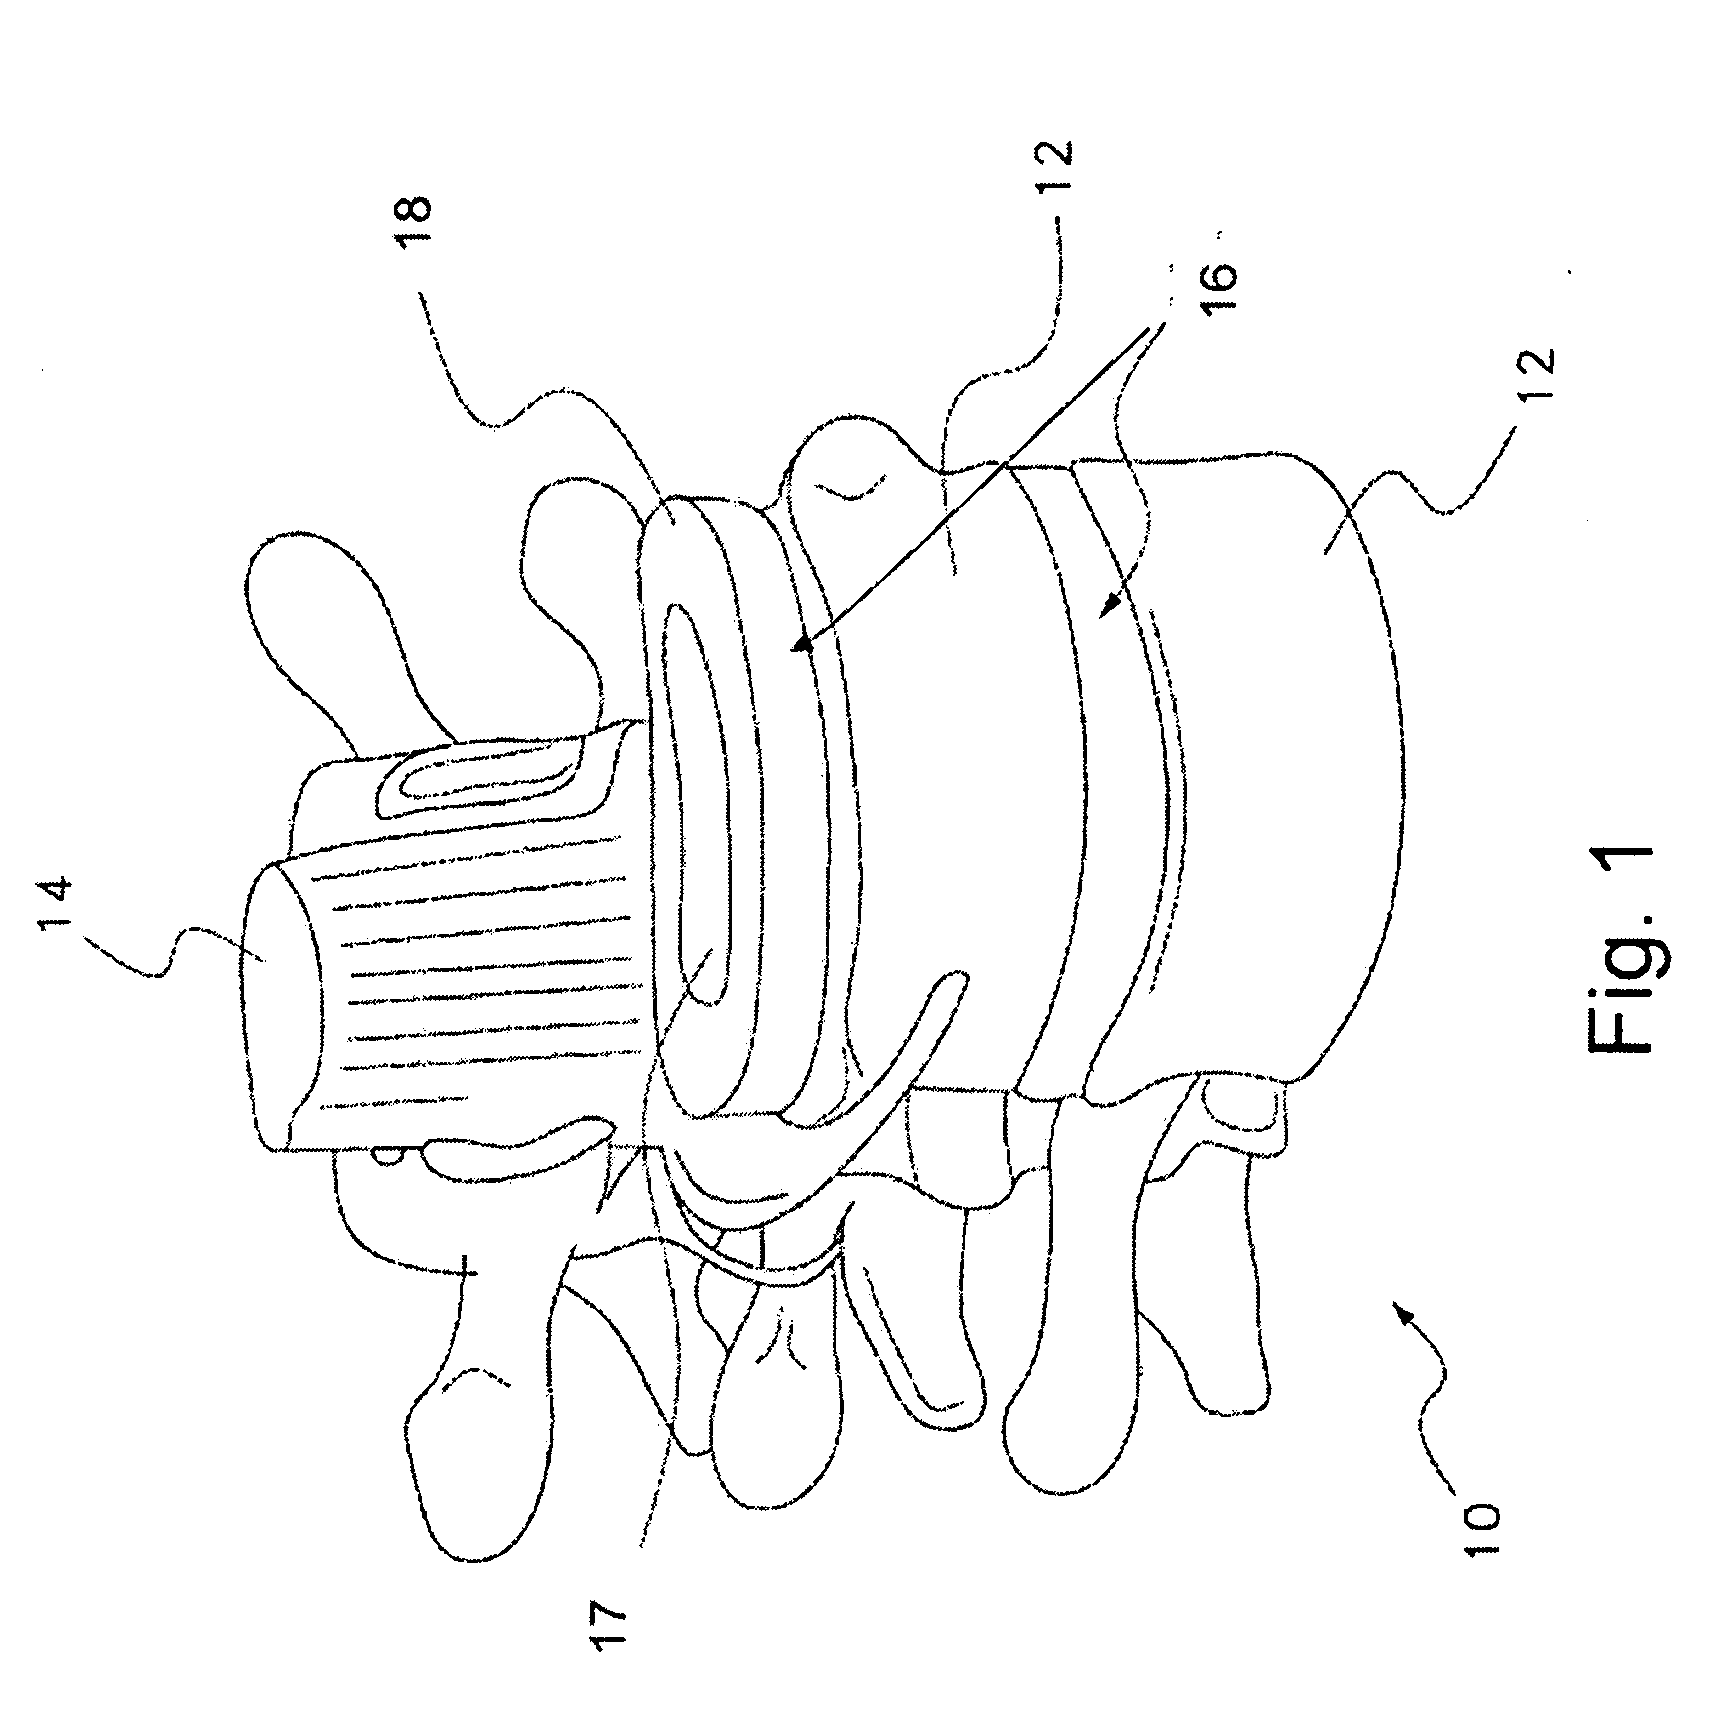 Instrumentation to Facilitate Access into the Intervertebral Disc Space and Introduction of Materials Therein